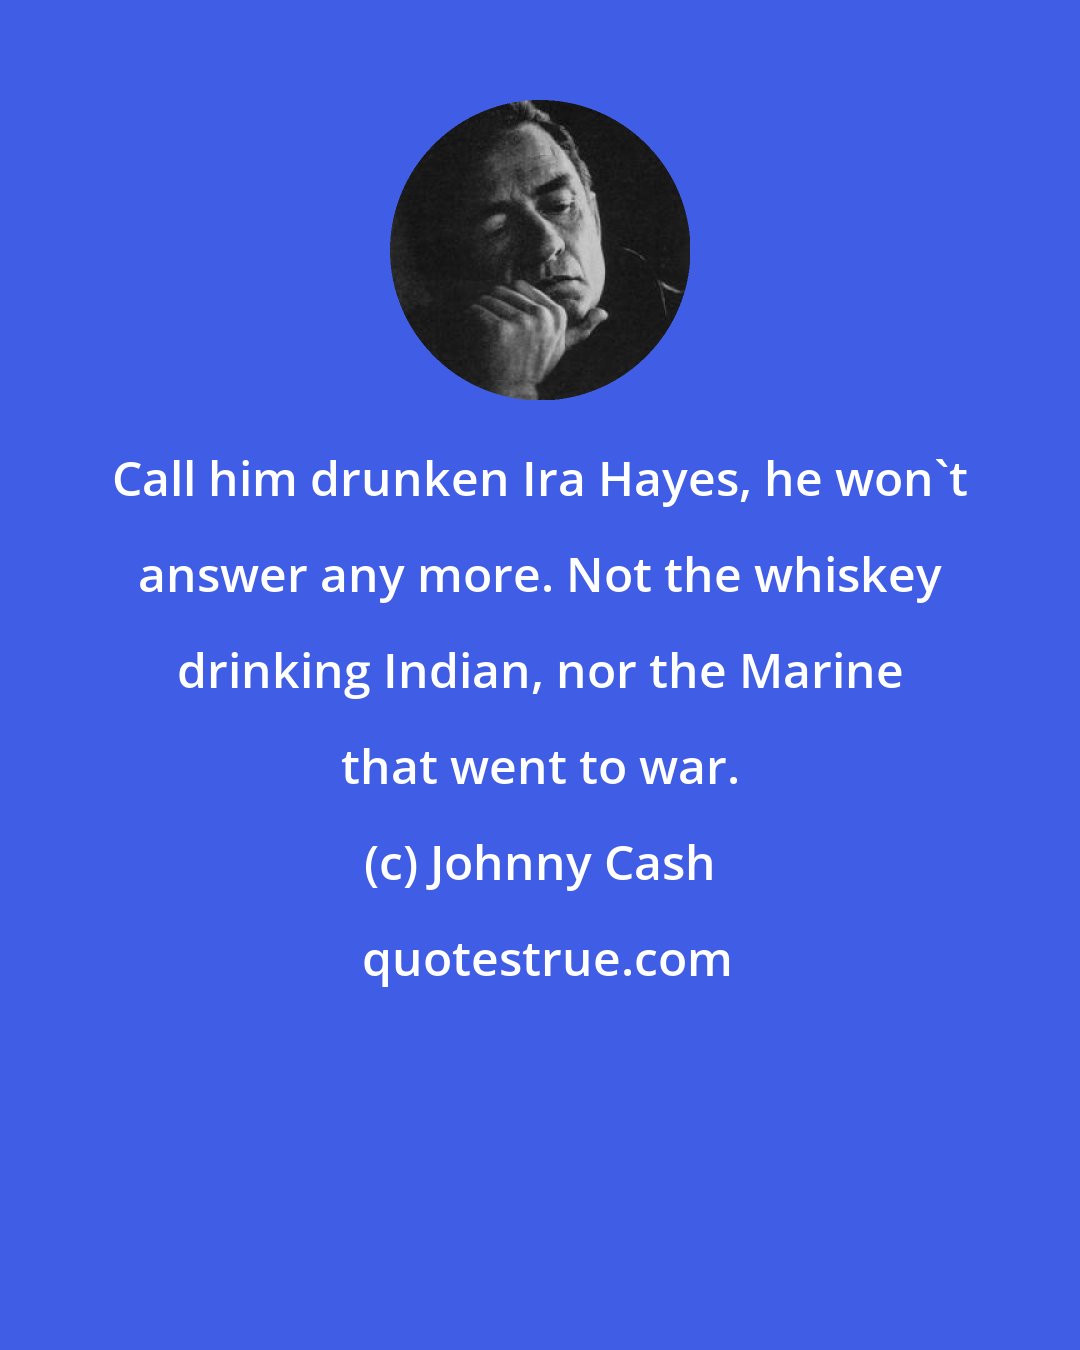 Johnny Cash: Call him drunken Ira Hayes, he won't answer any more. Not the whiskey drinking Indian, nor the Marine that went to war.